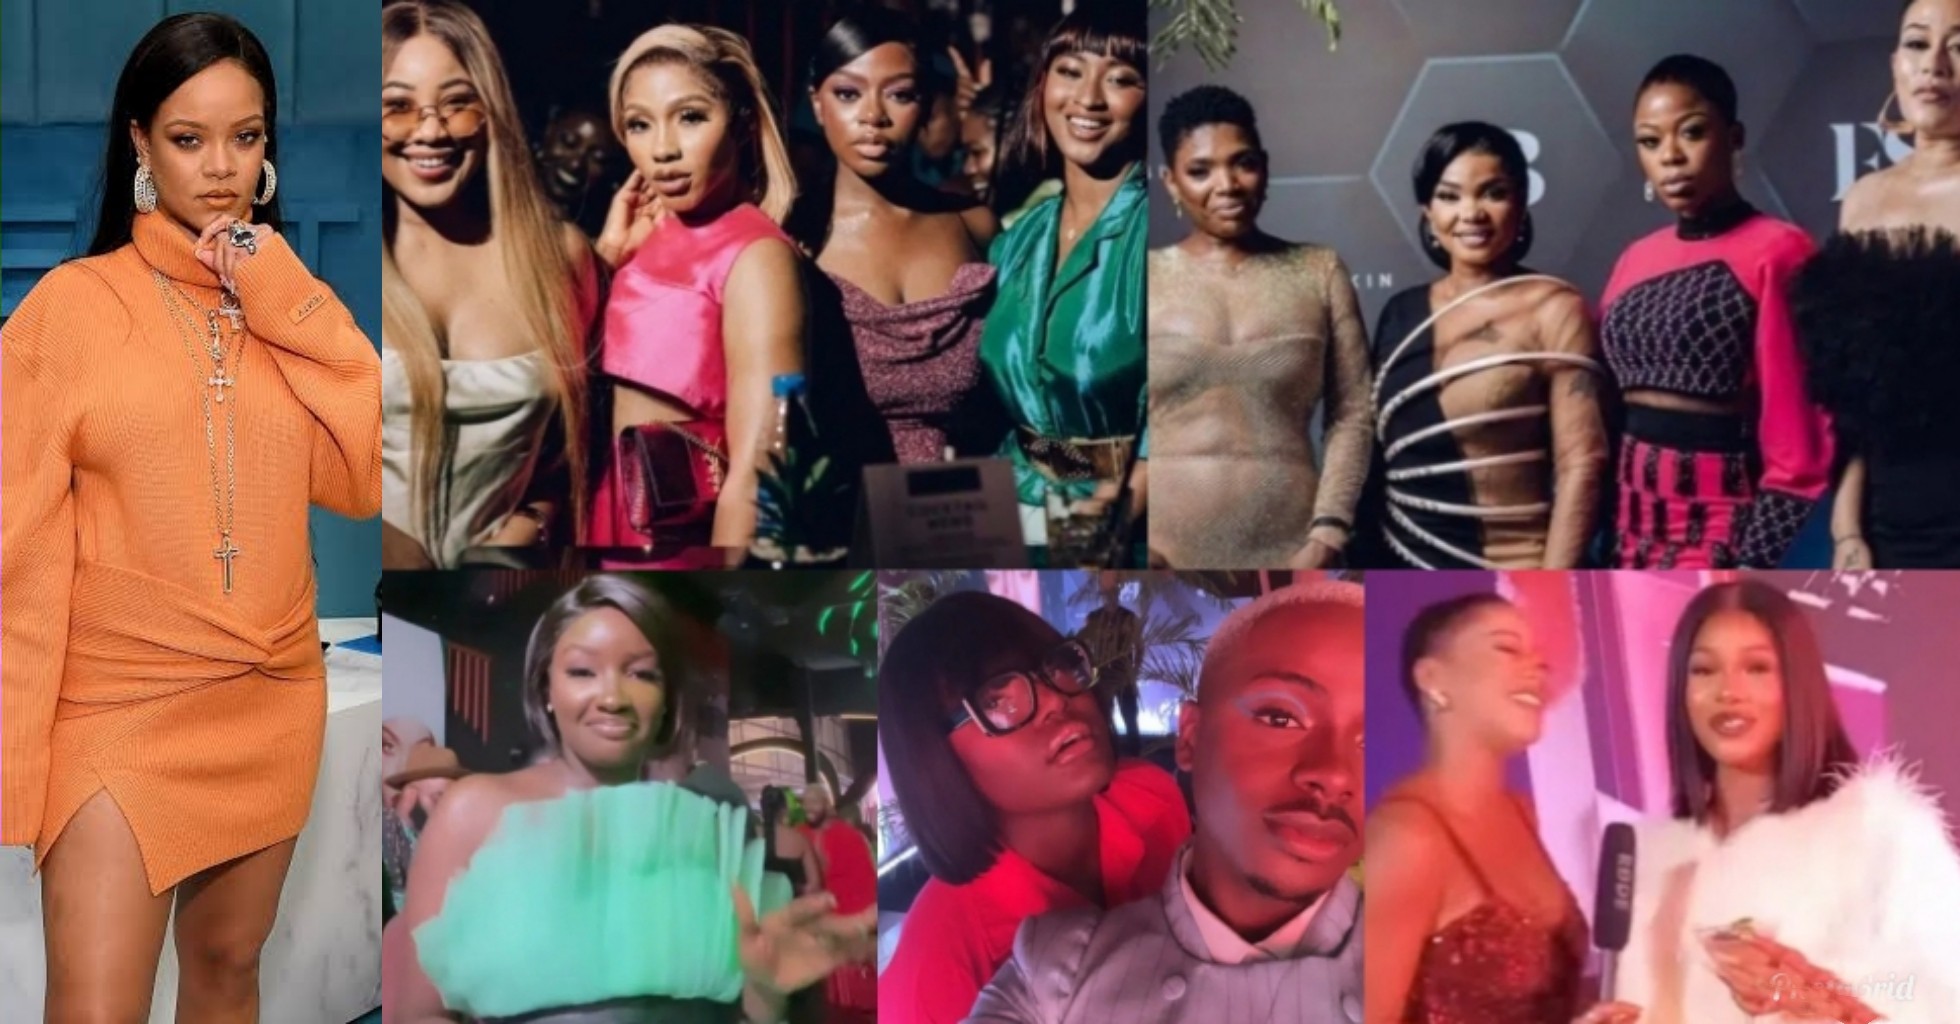 VIDEO: Annie Idibia, Iyabo Ojo, BBNaija stars, others step out in style for Rihanna's Fenty launch in Lagos